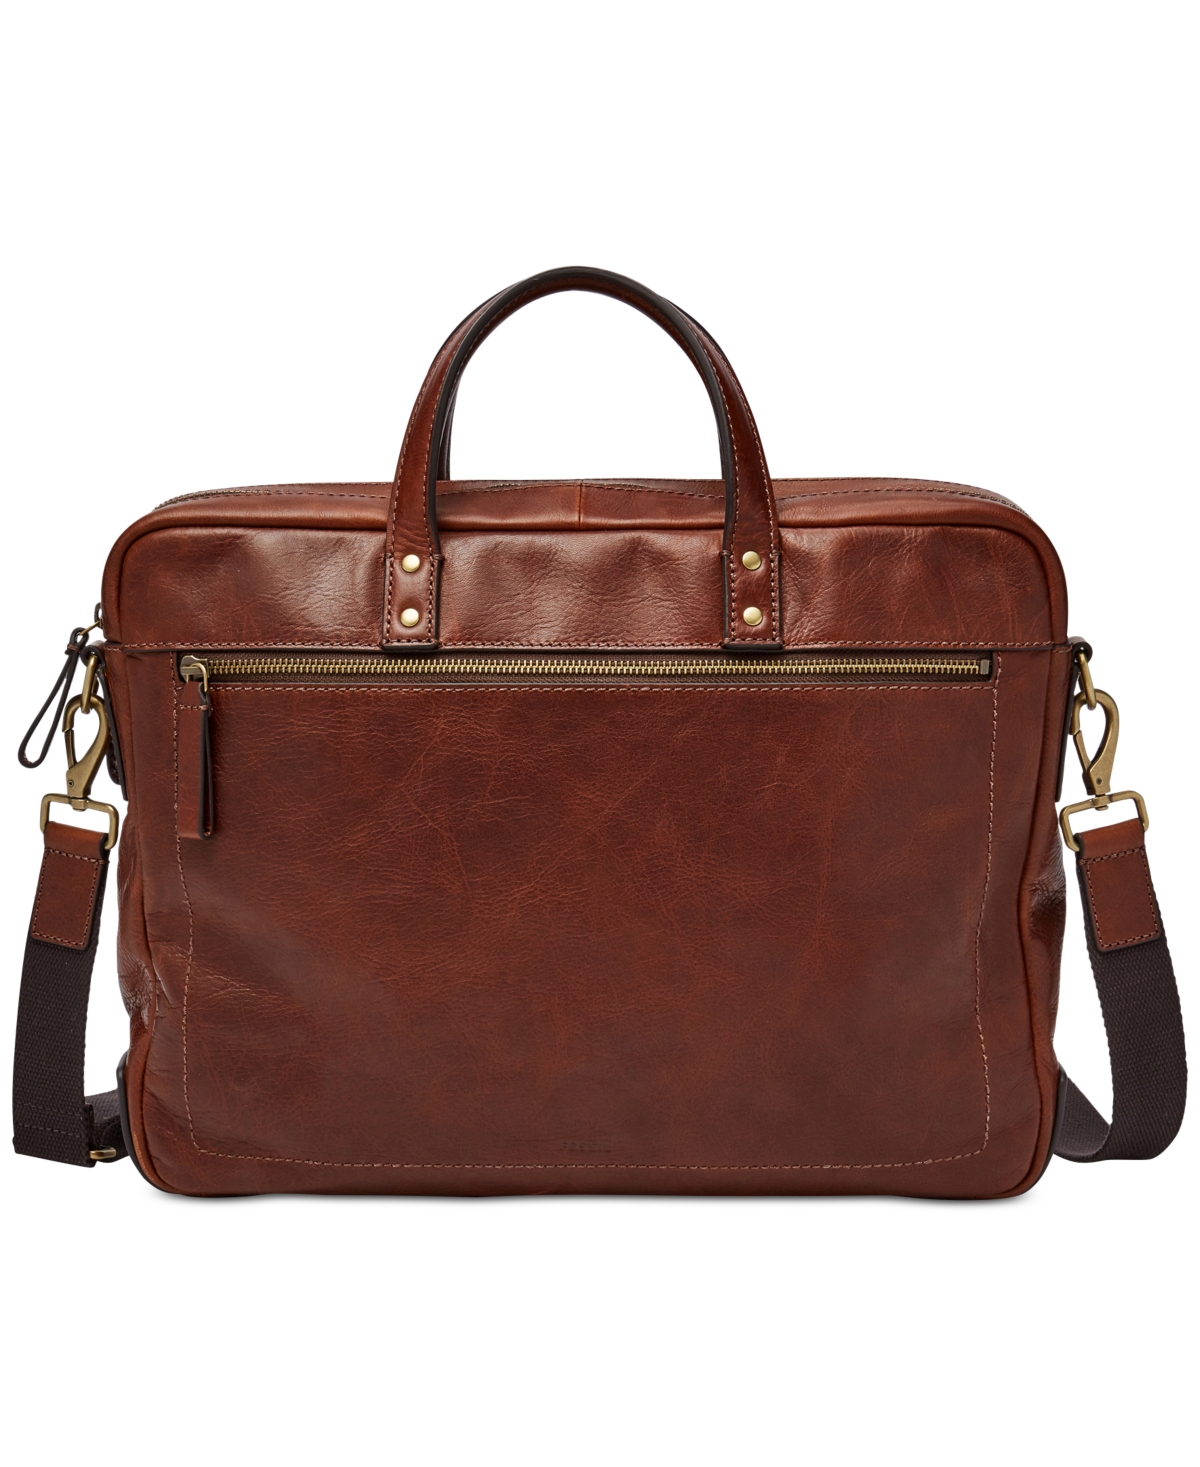 UPC 762346339359 product image for Fossil Men's Haskell Leather Briefcase | upcitemdb.com